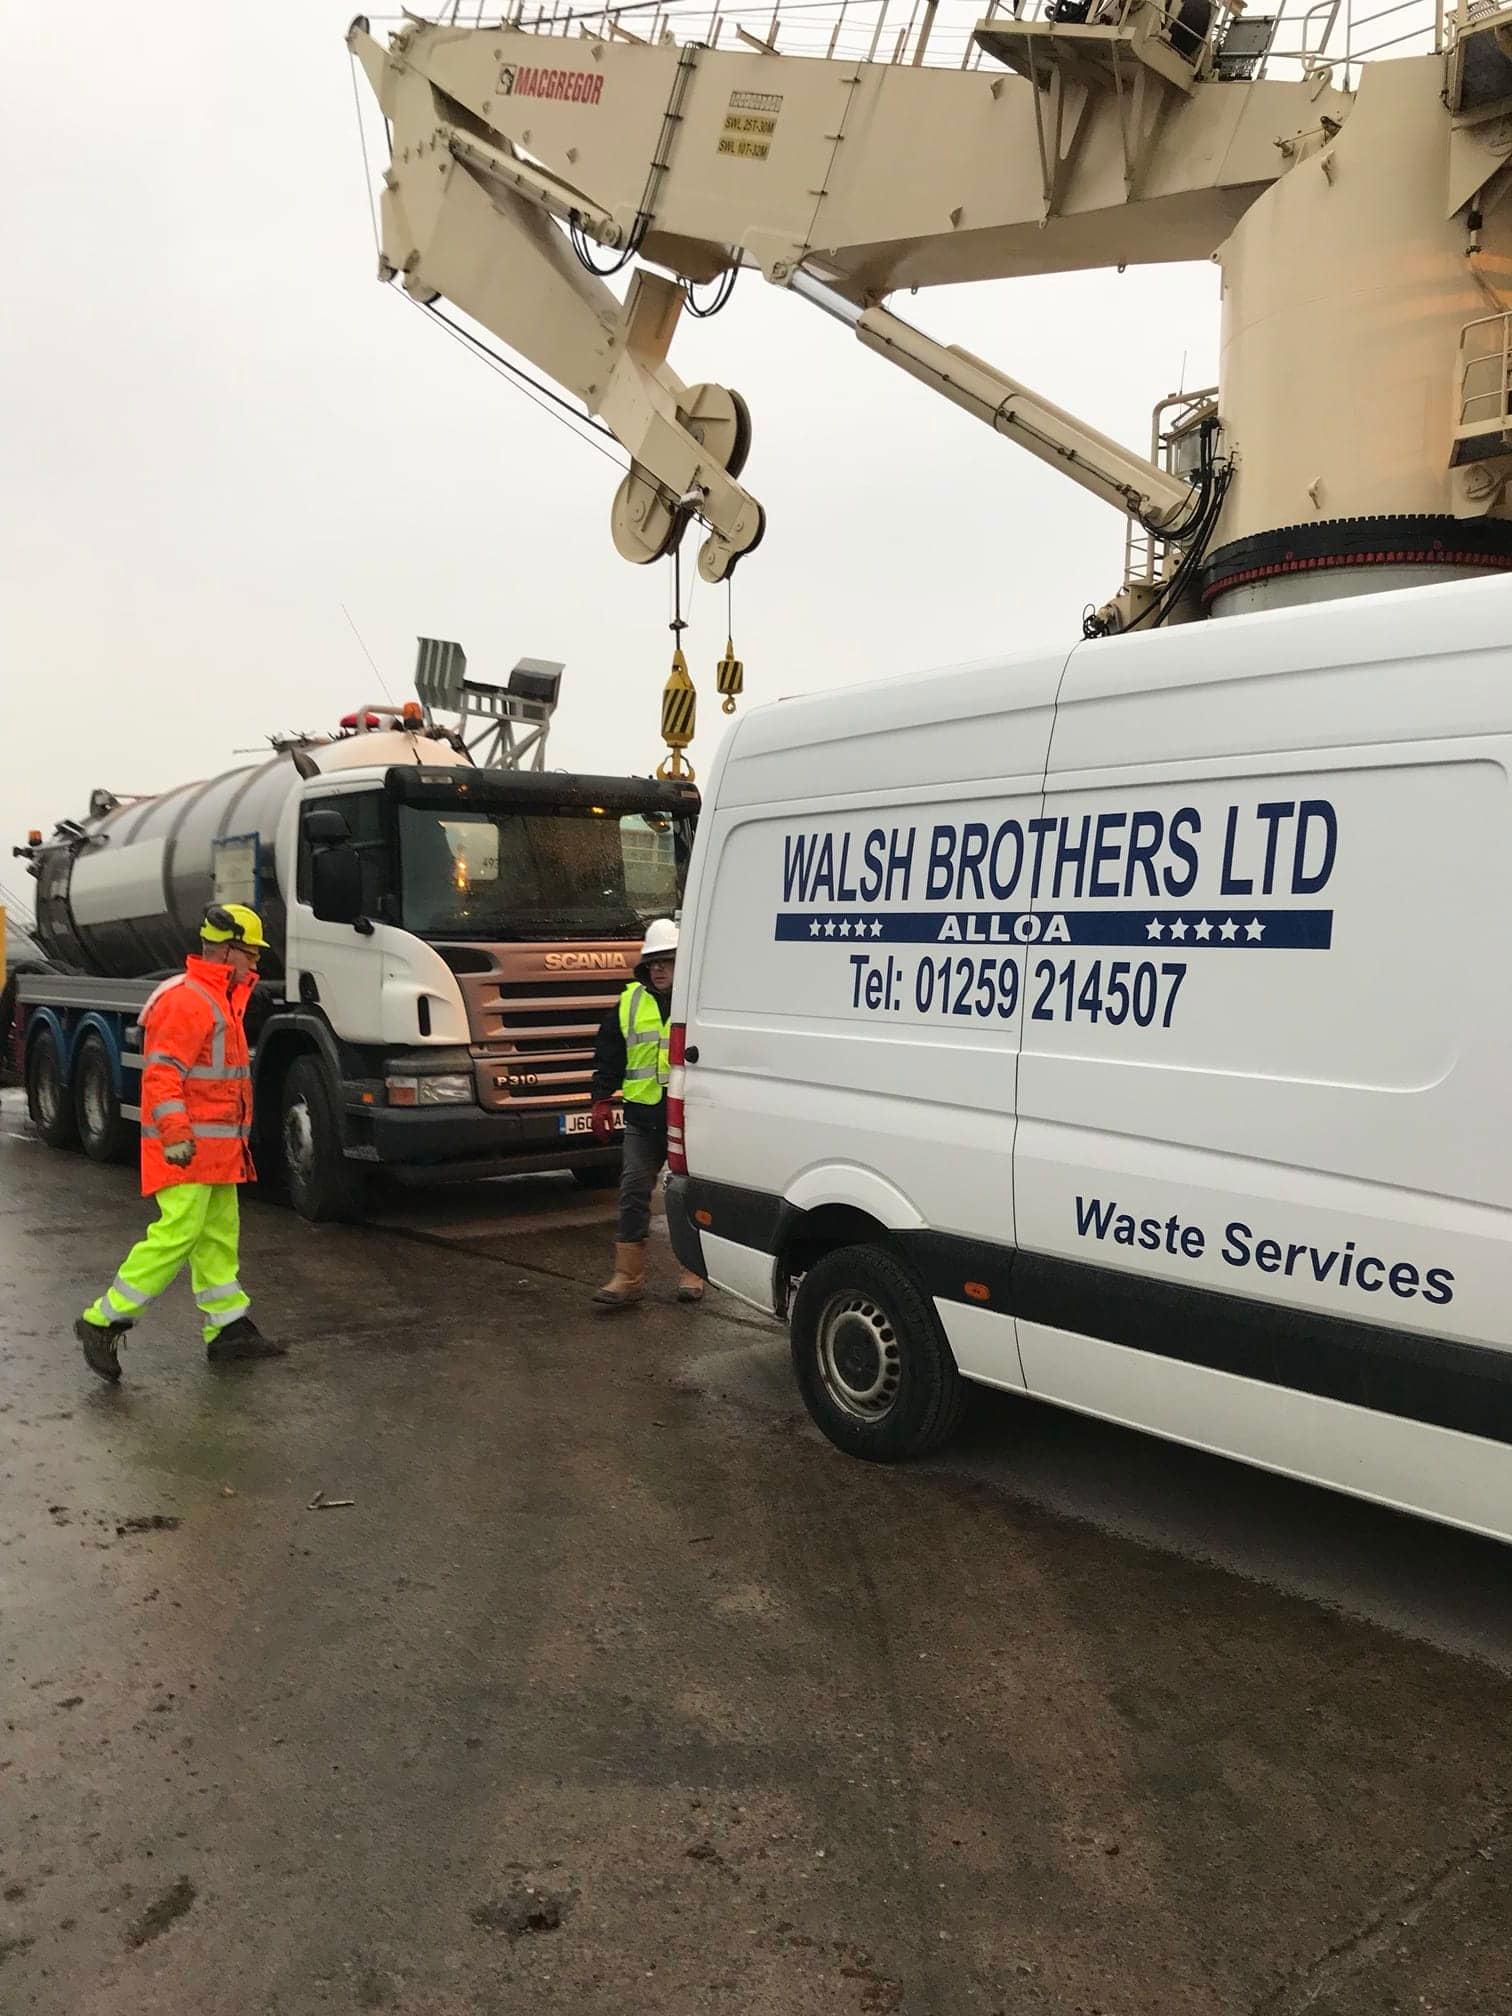 Images Walsh Bros Industrial Services Ltd